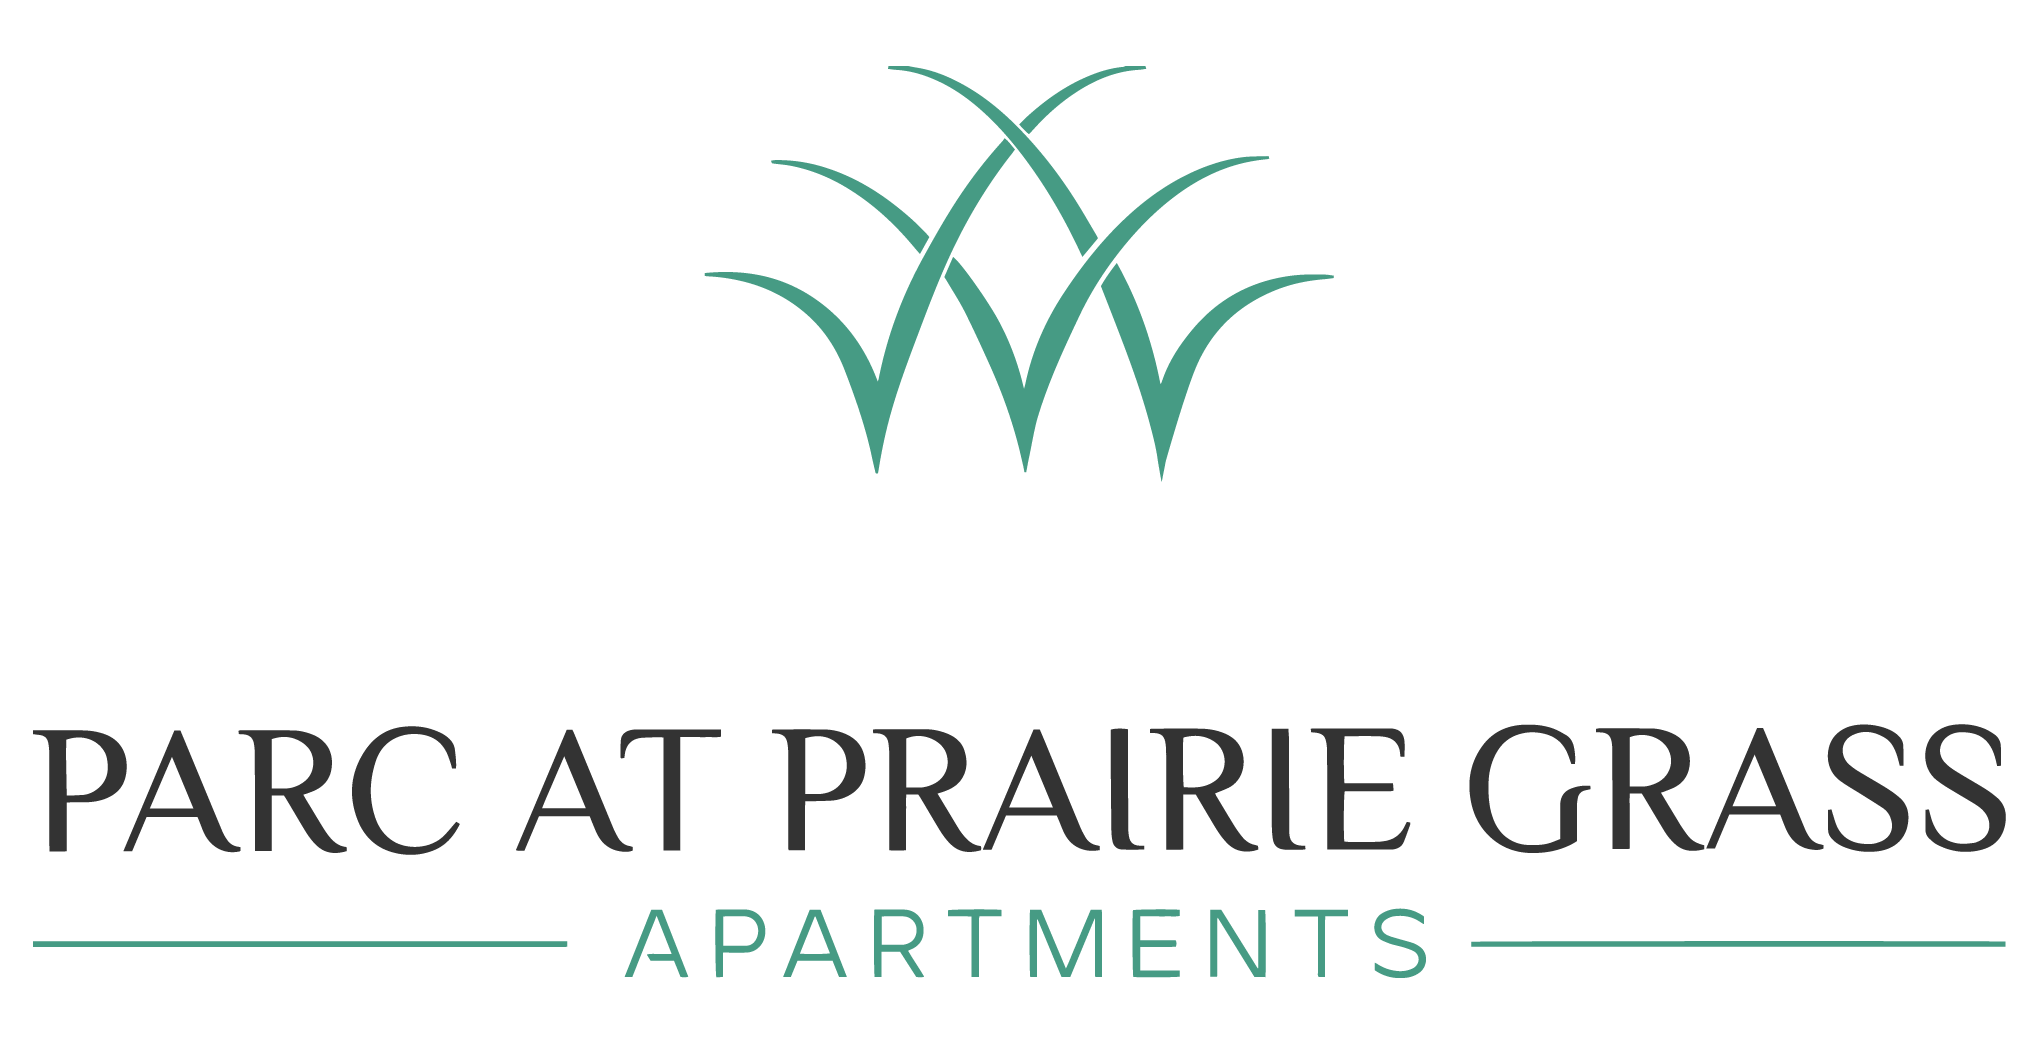 Parc at Prairie Grass logo, located in Colorado Springs, CO.